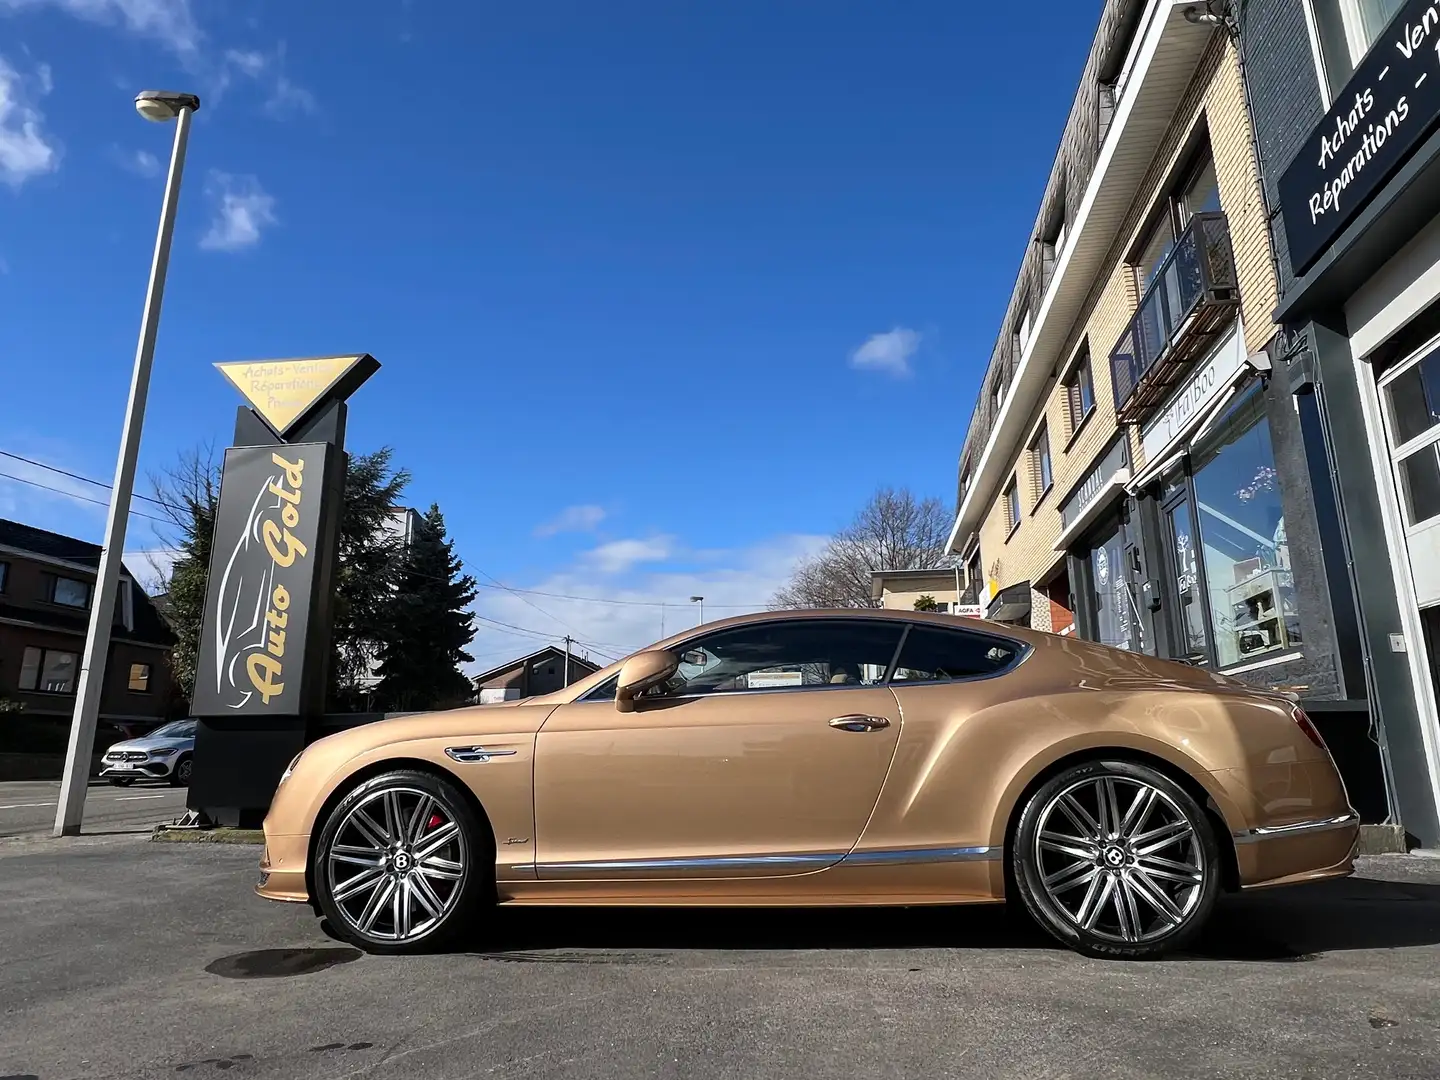 Bentley Continental GT SPEED GOLD 1 OF 21 LIMITED 1PROP FULL 💛 Or - 1